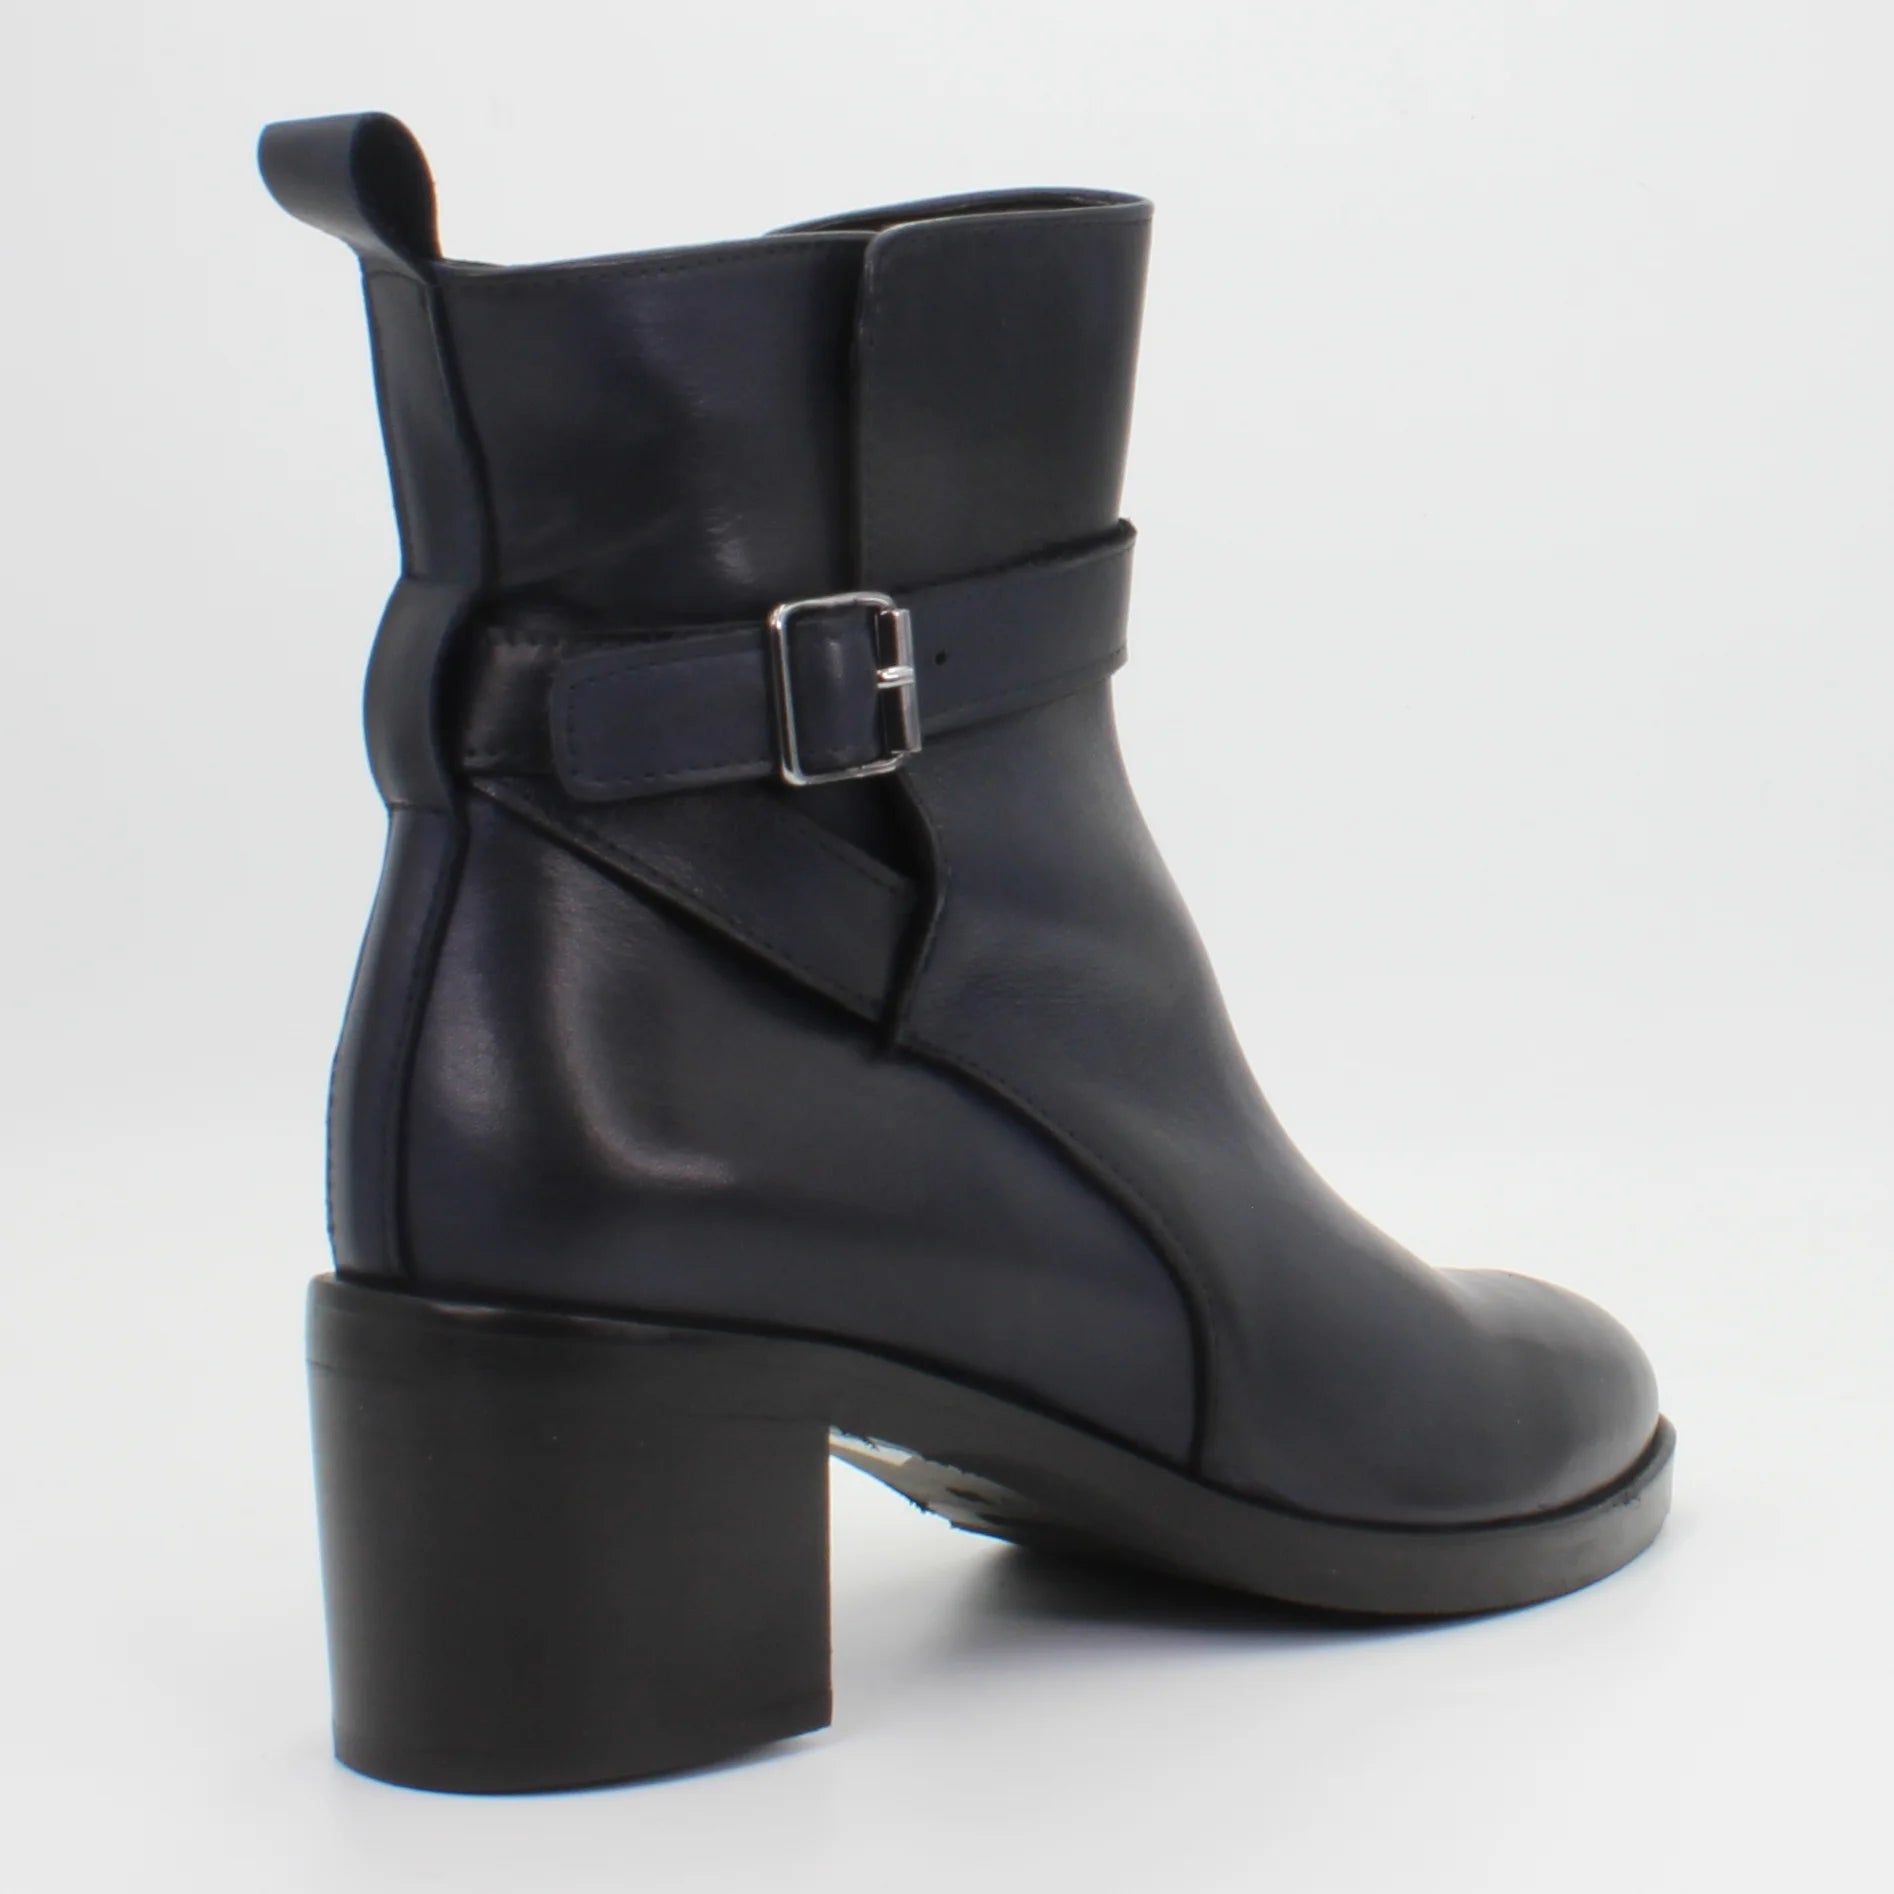 Shop Handmade Italian Leather Boot in Blue (GC2560) or browse our range of hand-made Italian boots for women in leather or suede in-store at Aliverti Cape Town, or shop online. We deliver in South Africa & offer multiple payment plans as well as accept multiple safe & secure payment methods.